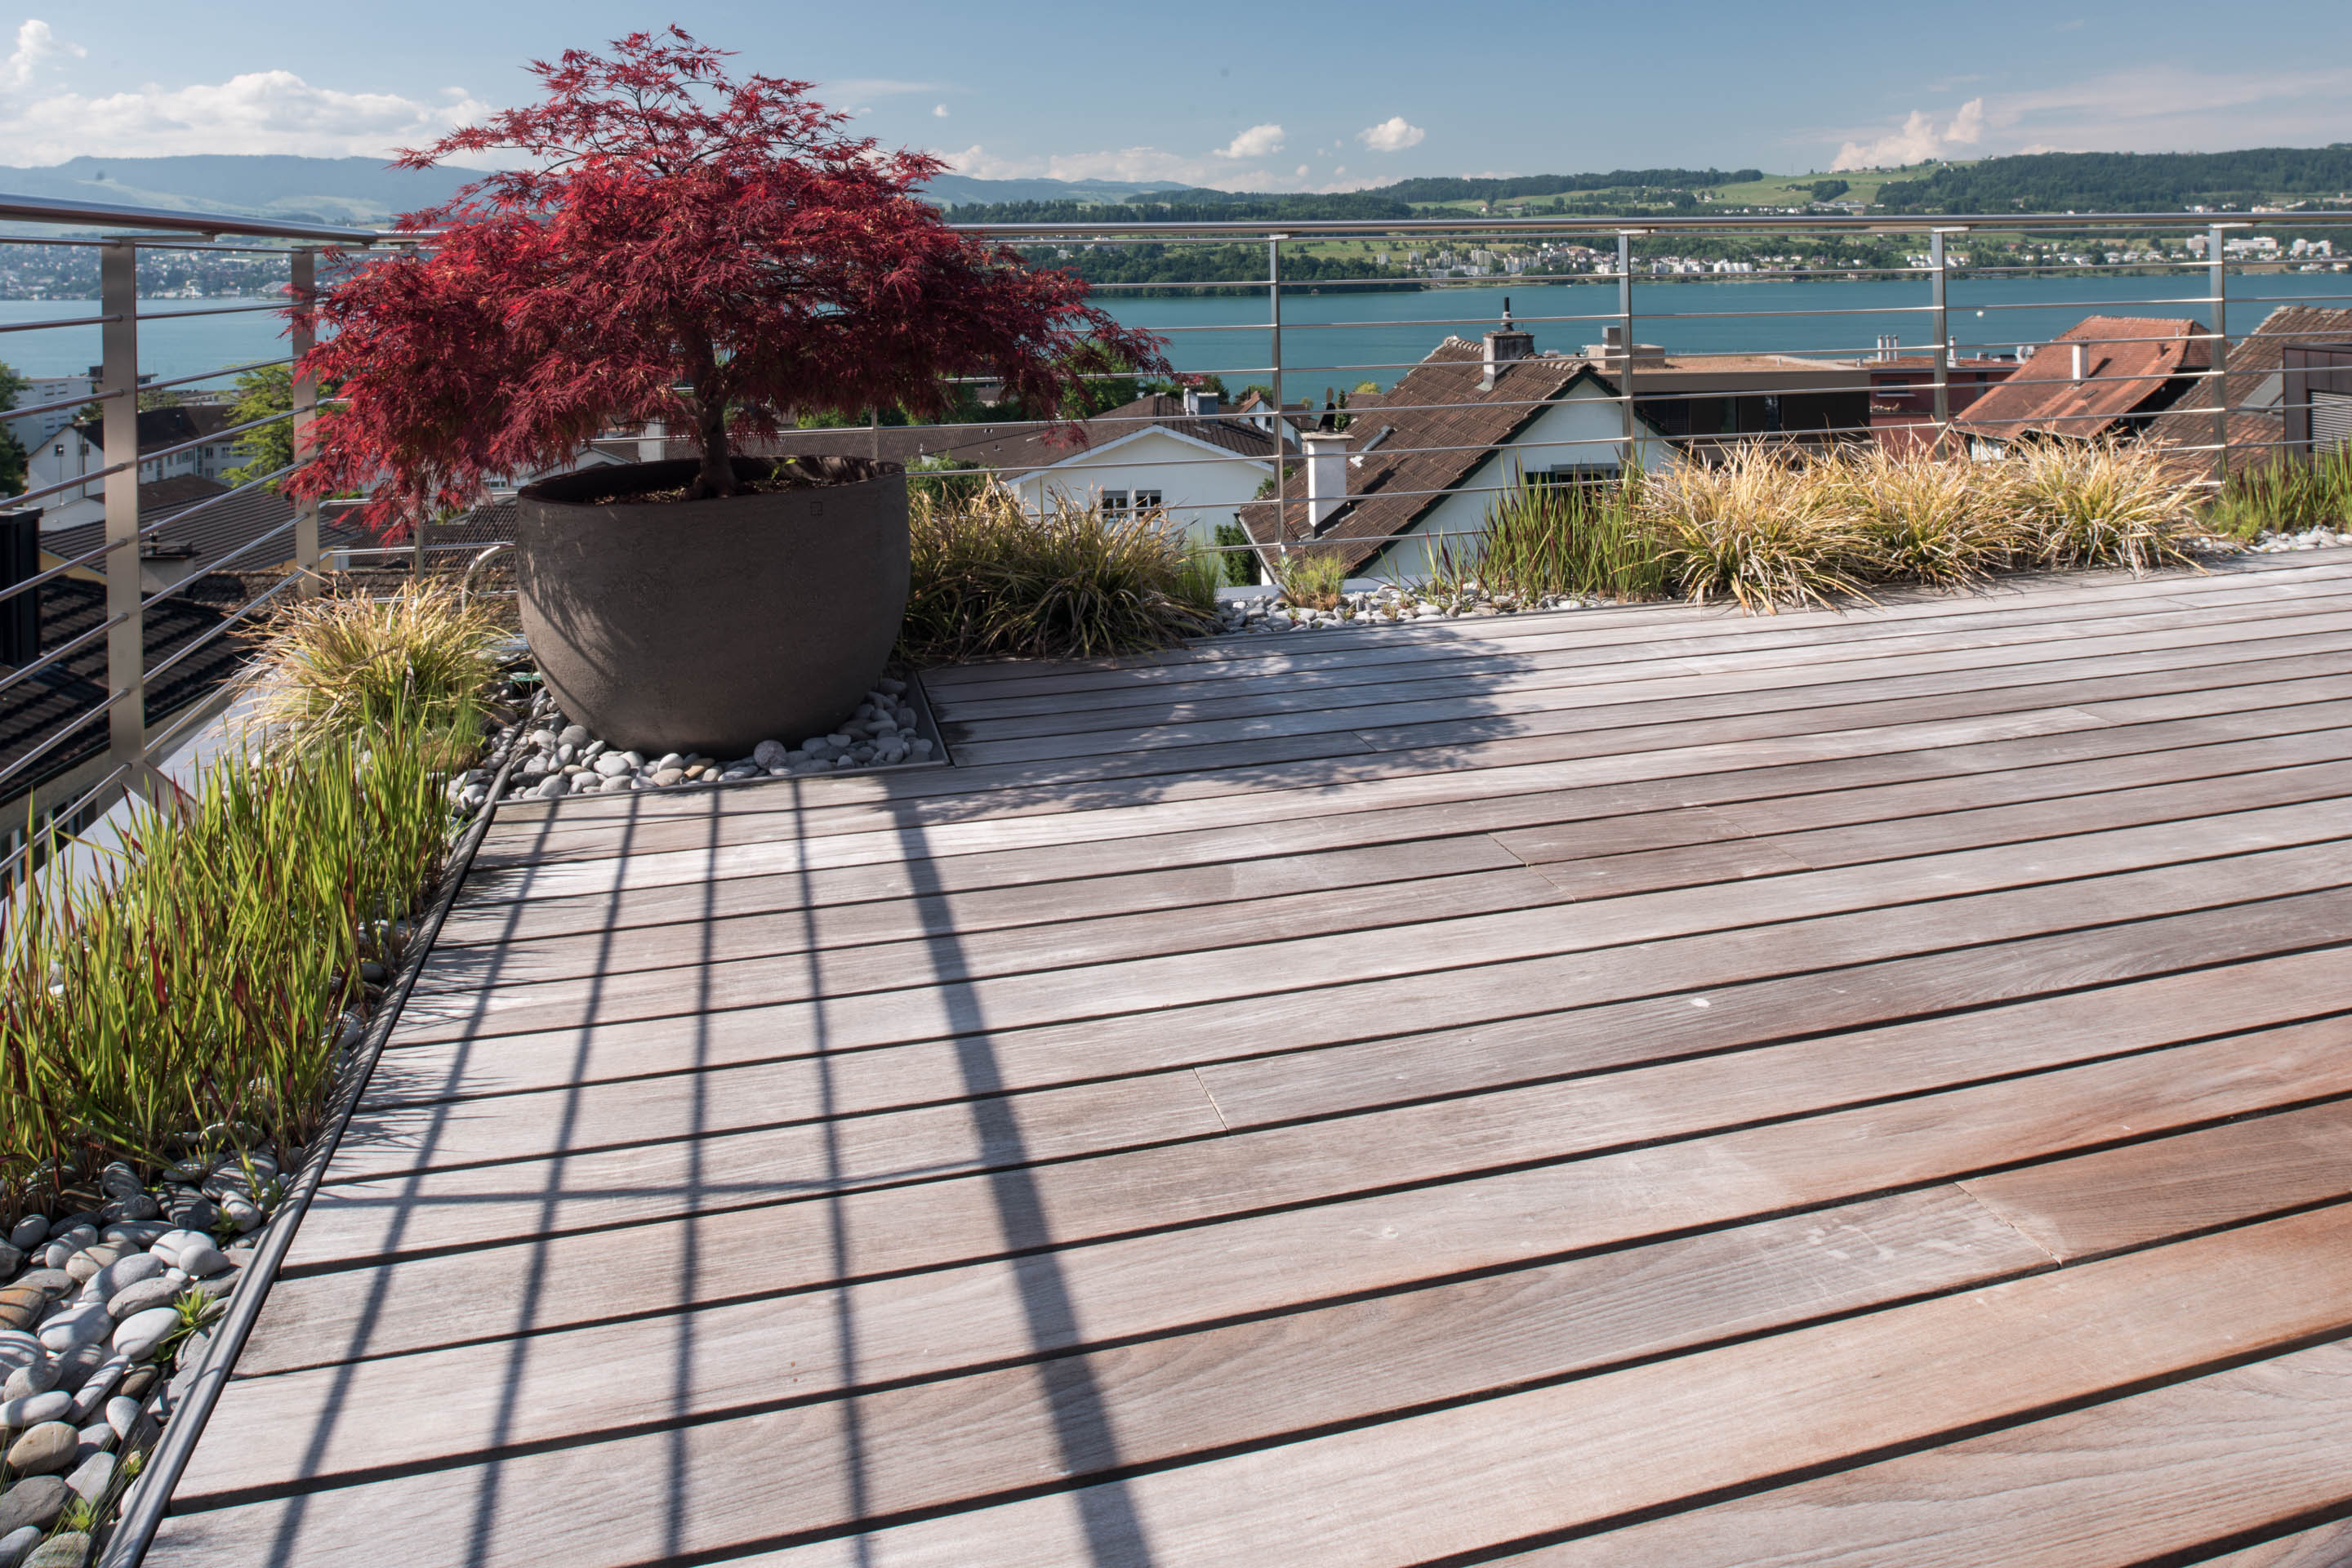 PRIVATE VILLA AT THE LAKE | Wooden decking boards Ipé invisible fixed